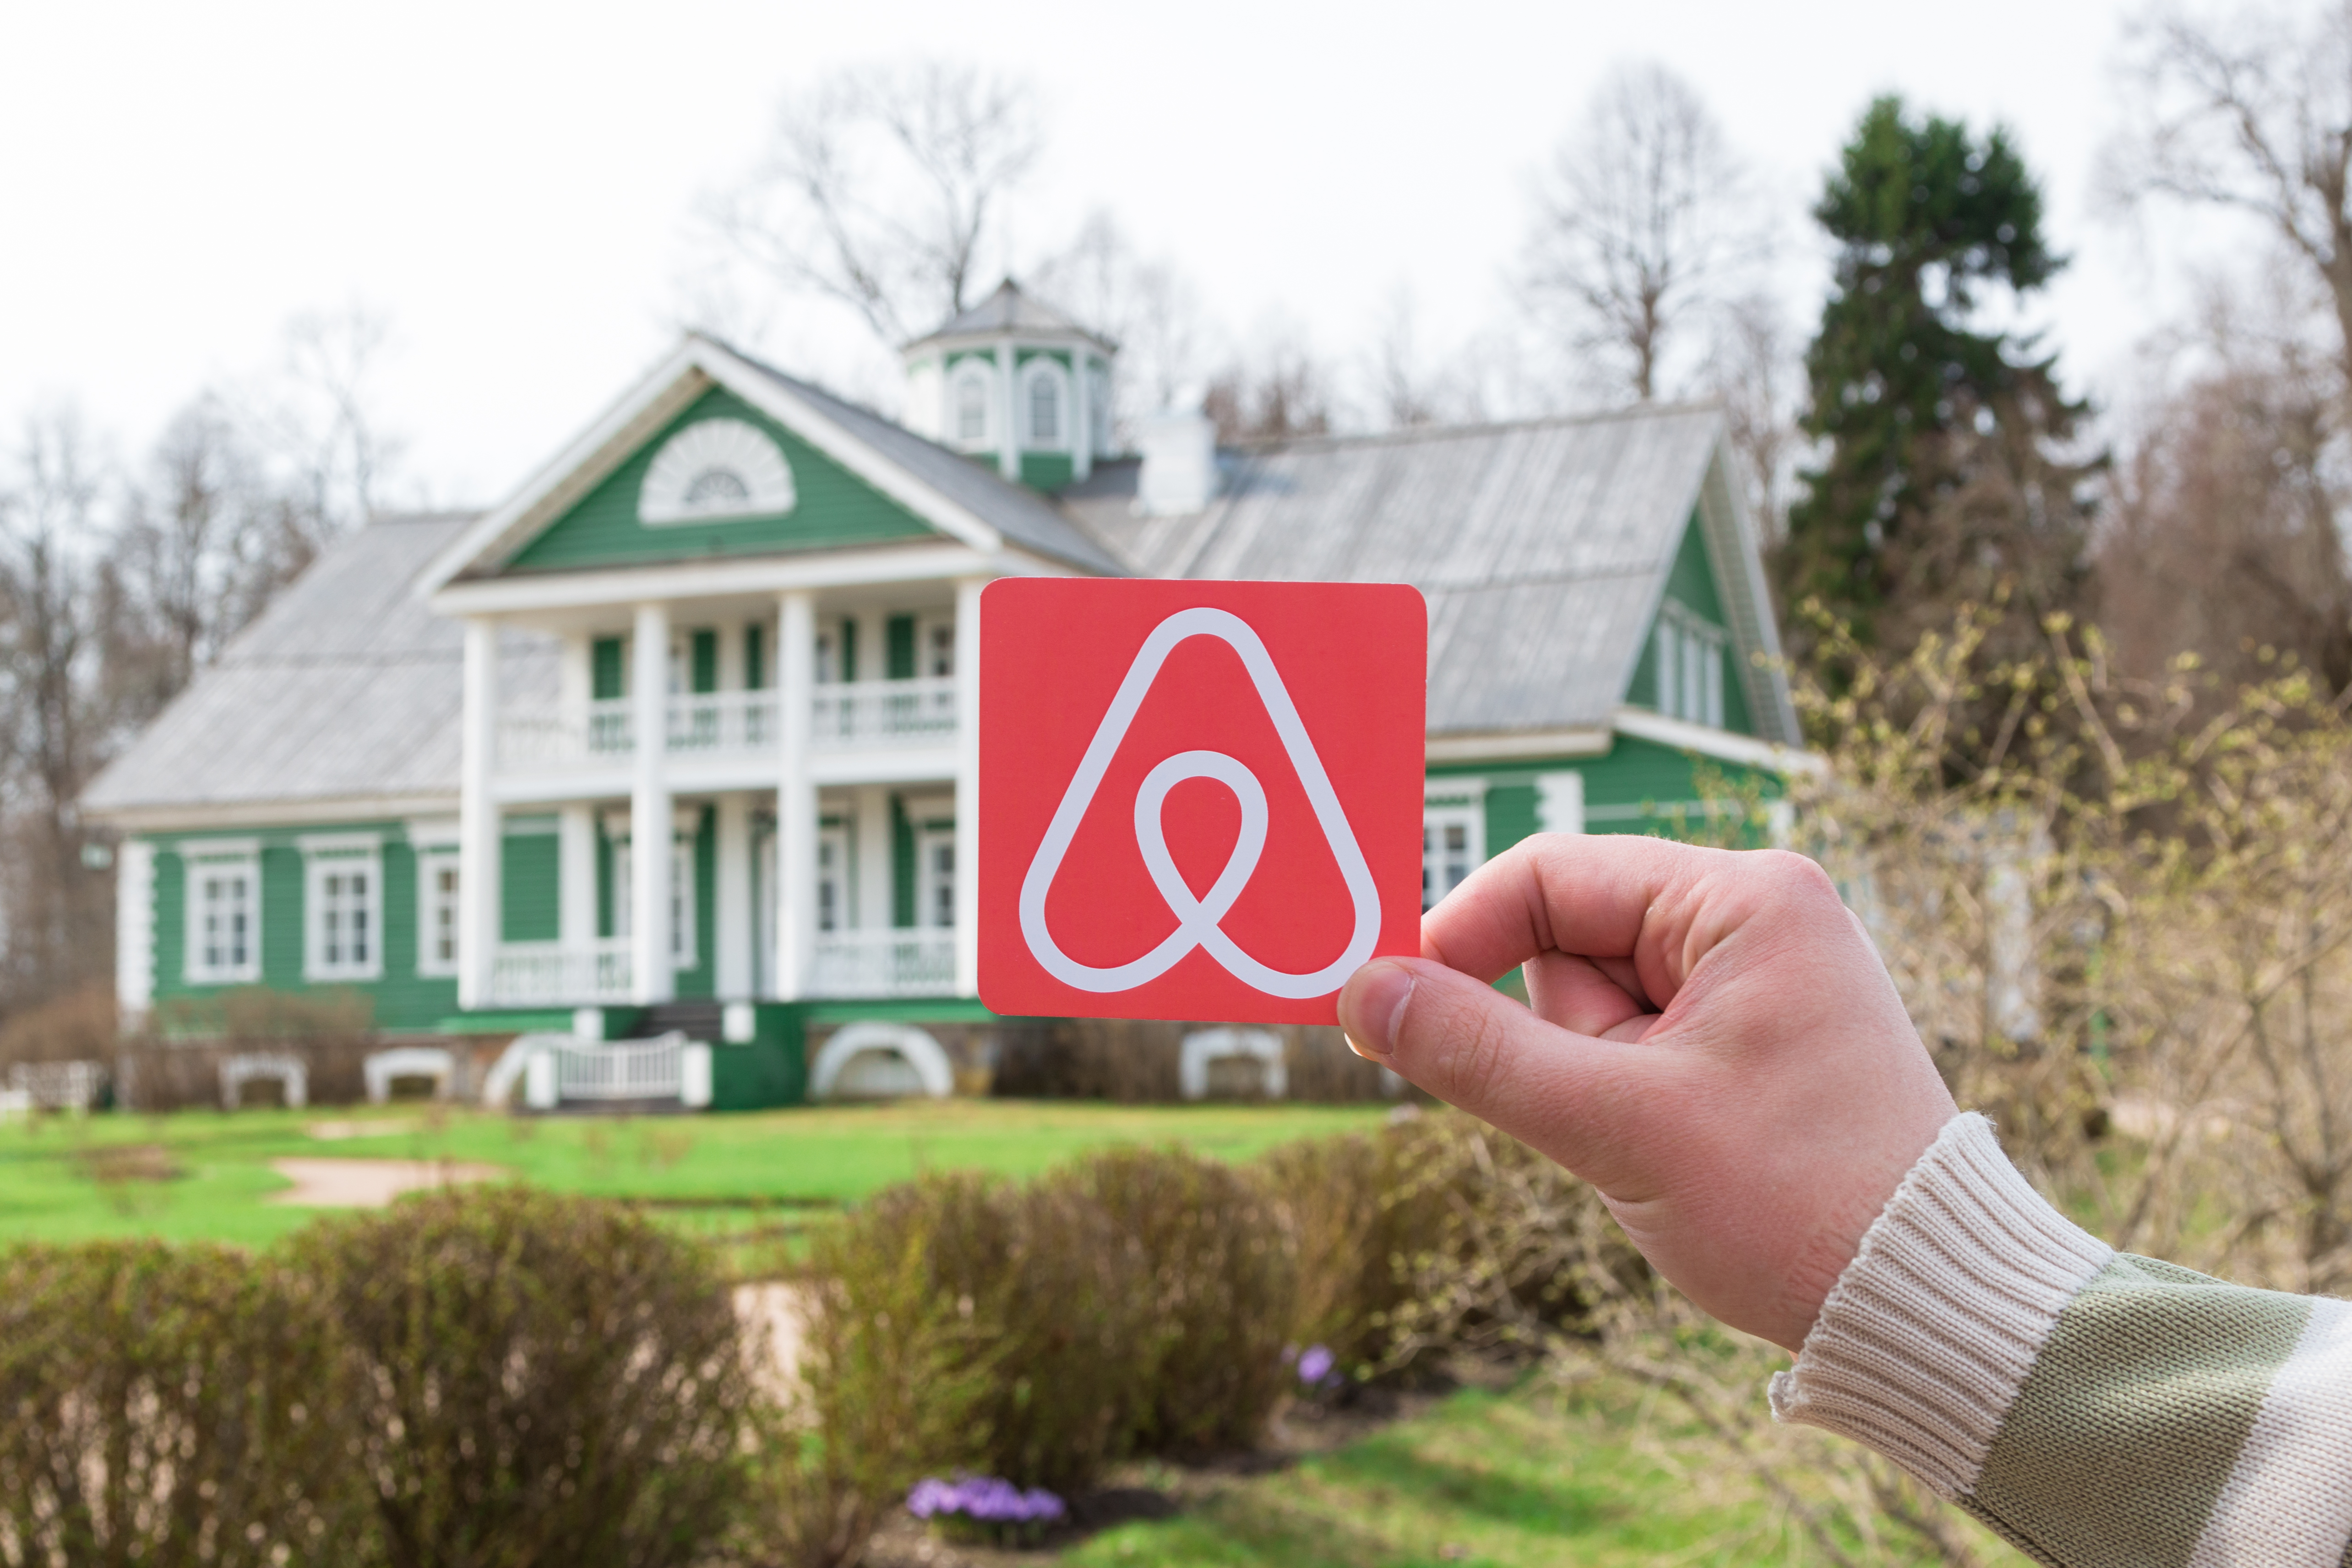 Should You Have Multiple Airbnb Accounts? How Would You Manage Them?